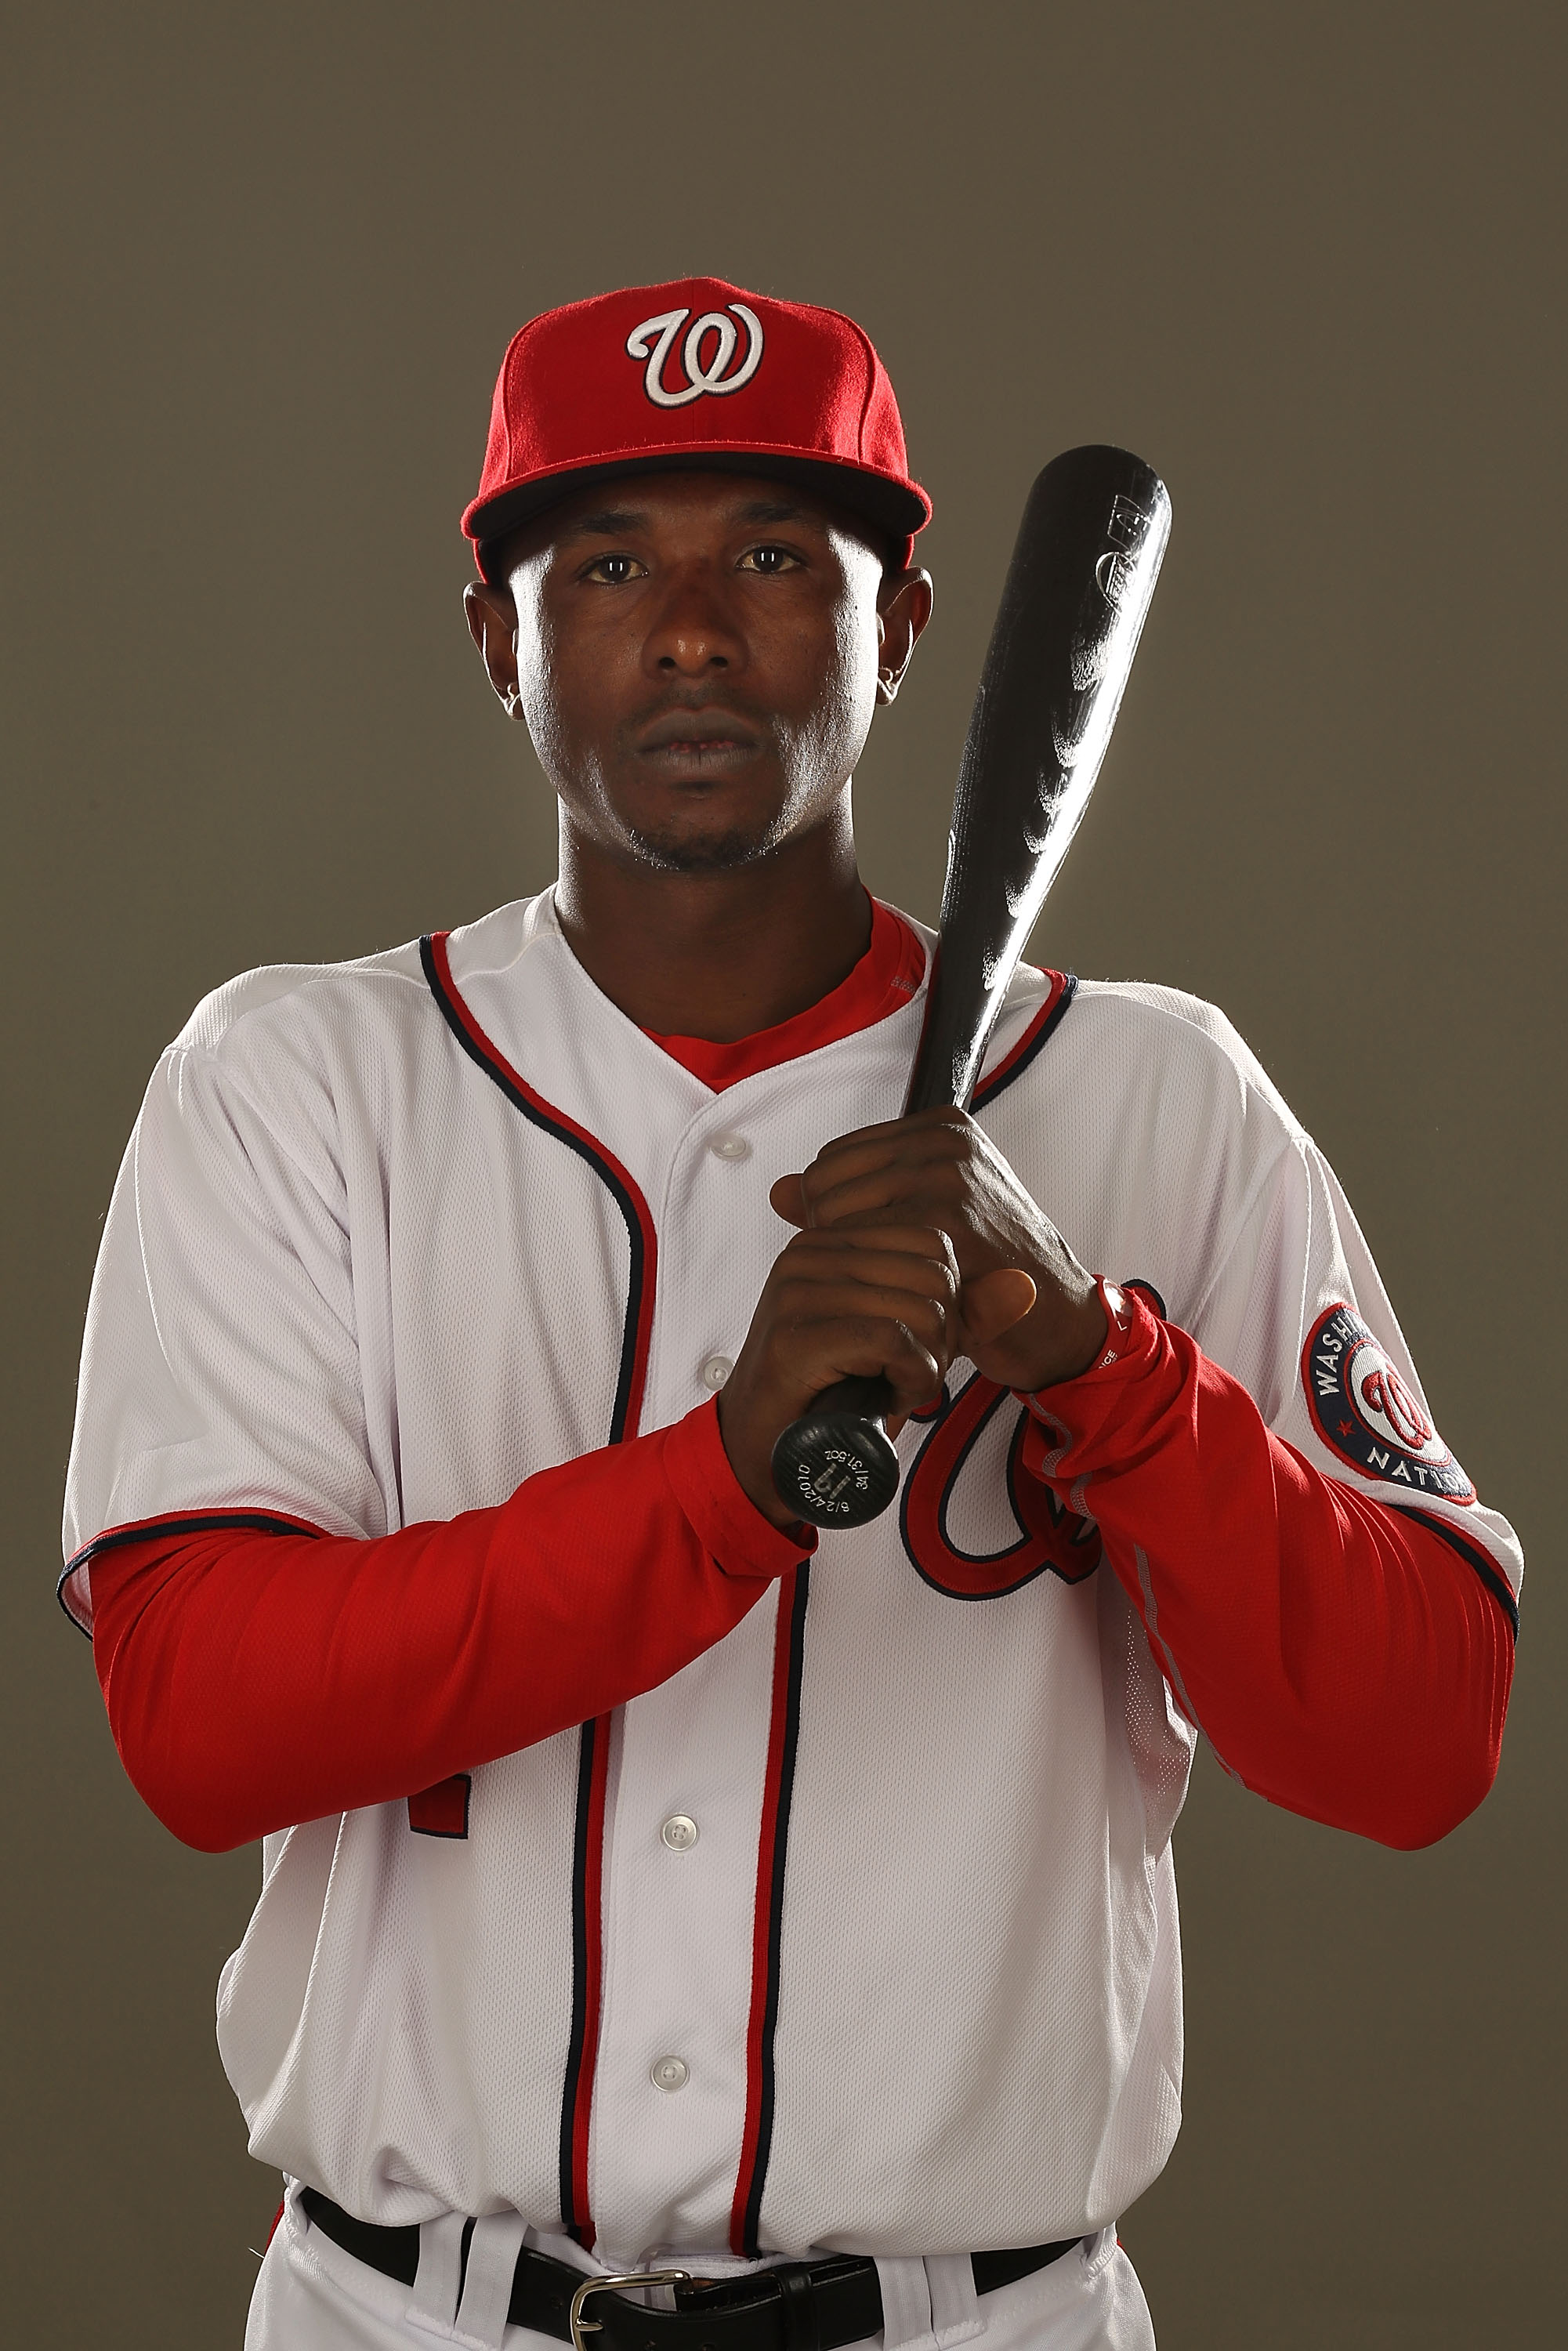 VIERA, FL - FEBRUARY 25:  Nyjer Morgan #1 of the Washington Nationals poses for a portrait during Spring Training Photo Day at Space Coast Stadium on February 25, 2011 in Viera, Florida.  (Photo by Al Bello/Getty Images)